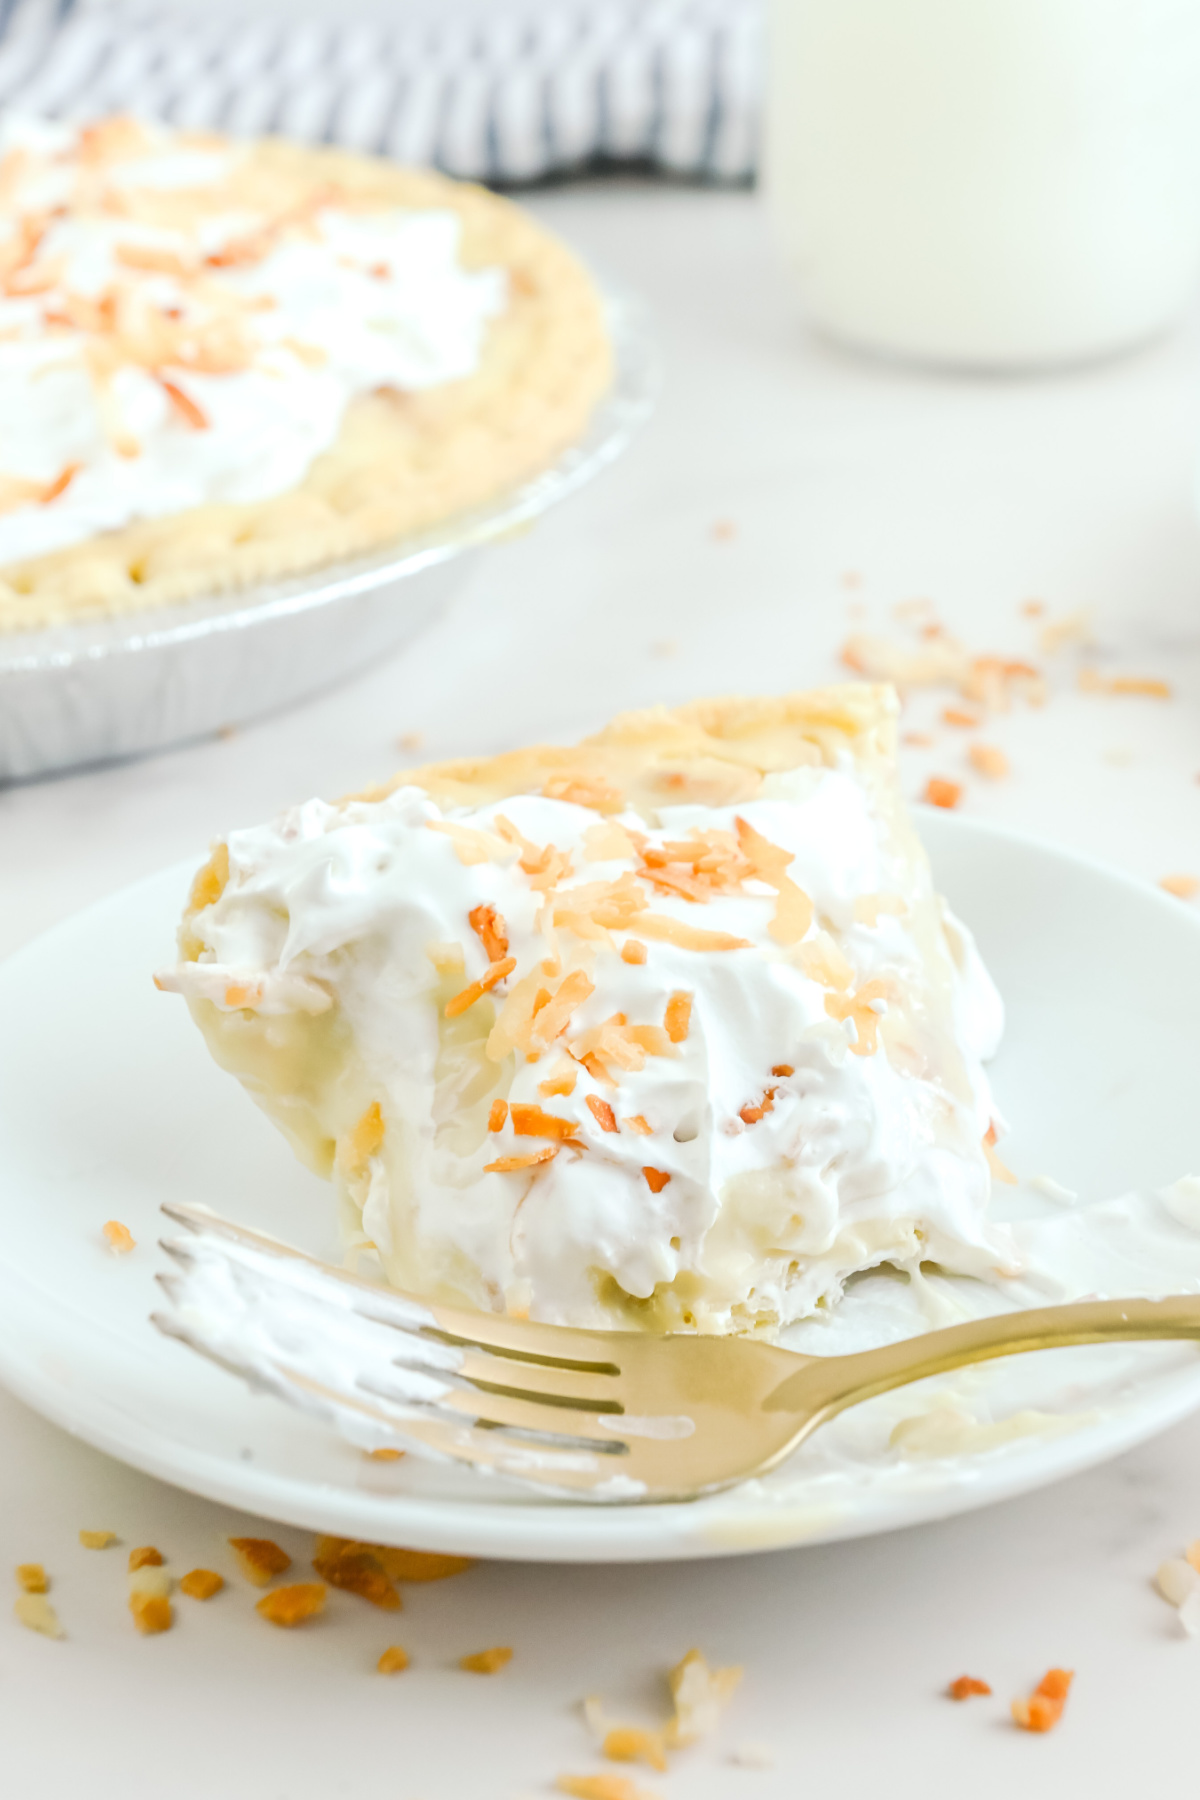 A slice of coconut cream pie with a bite taken out of it